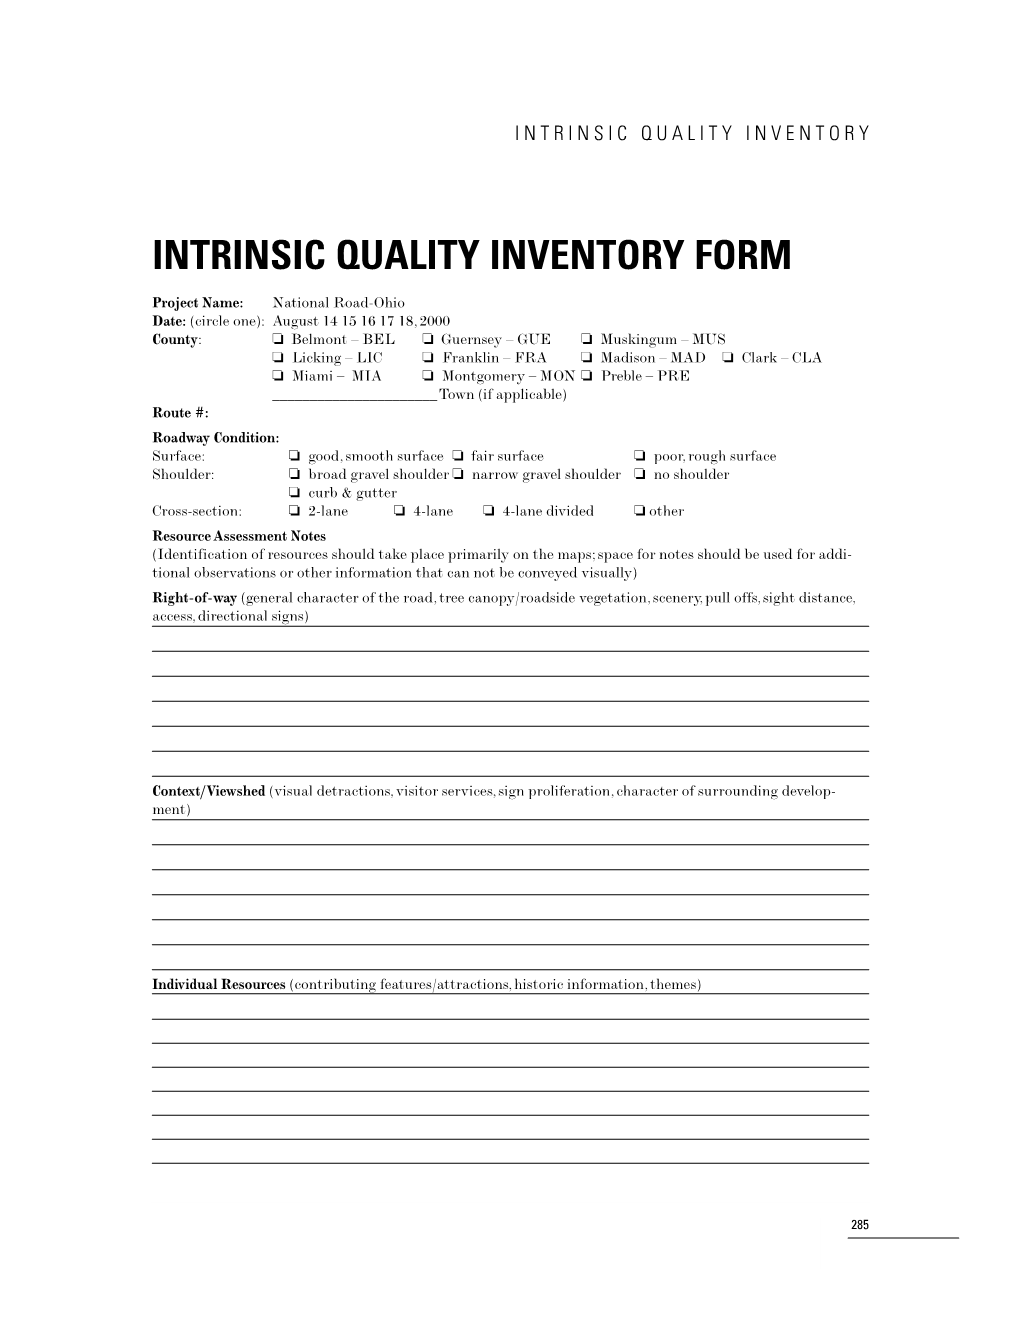 Chapter 5, Instrinsic Quality Inventory